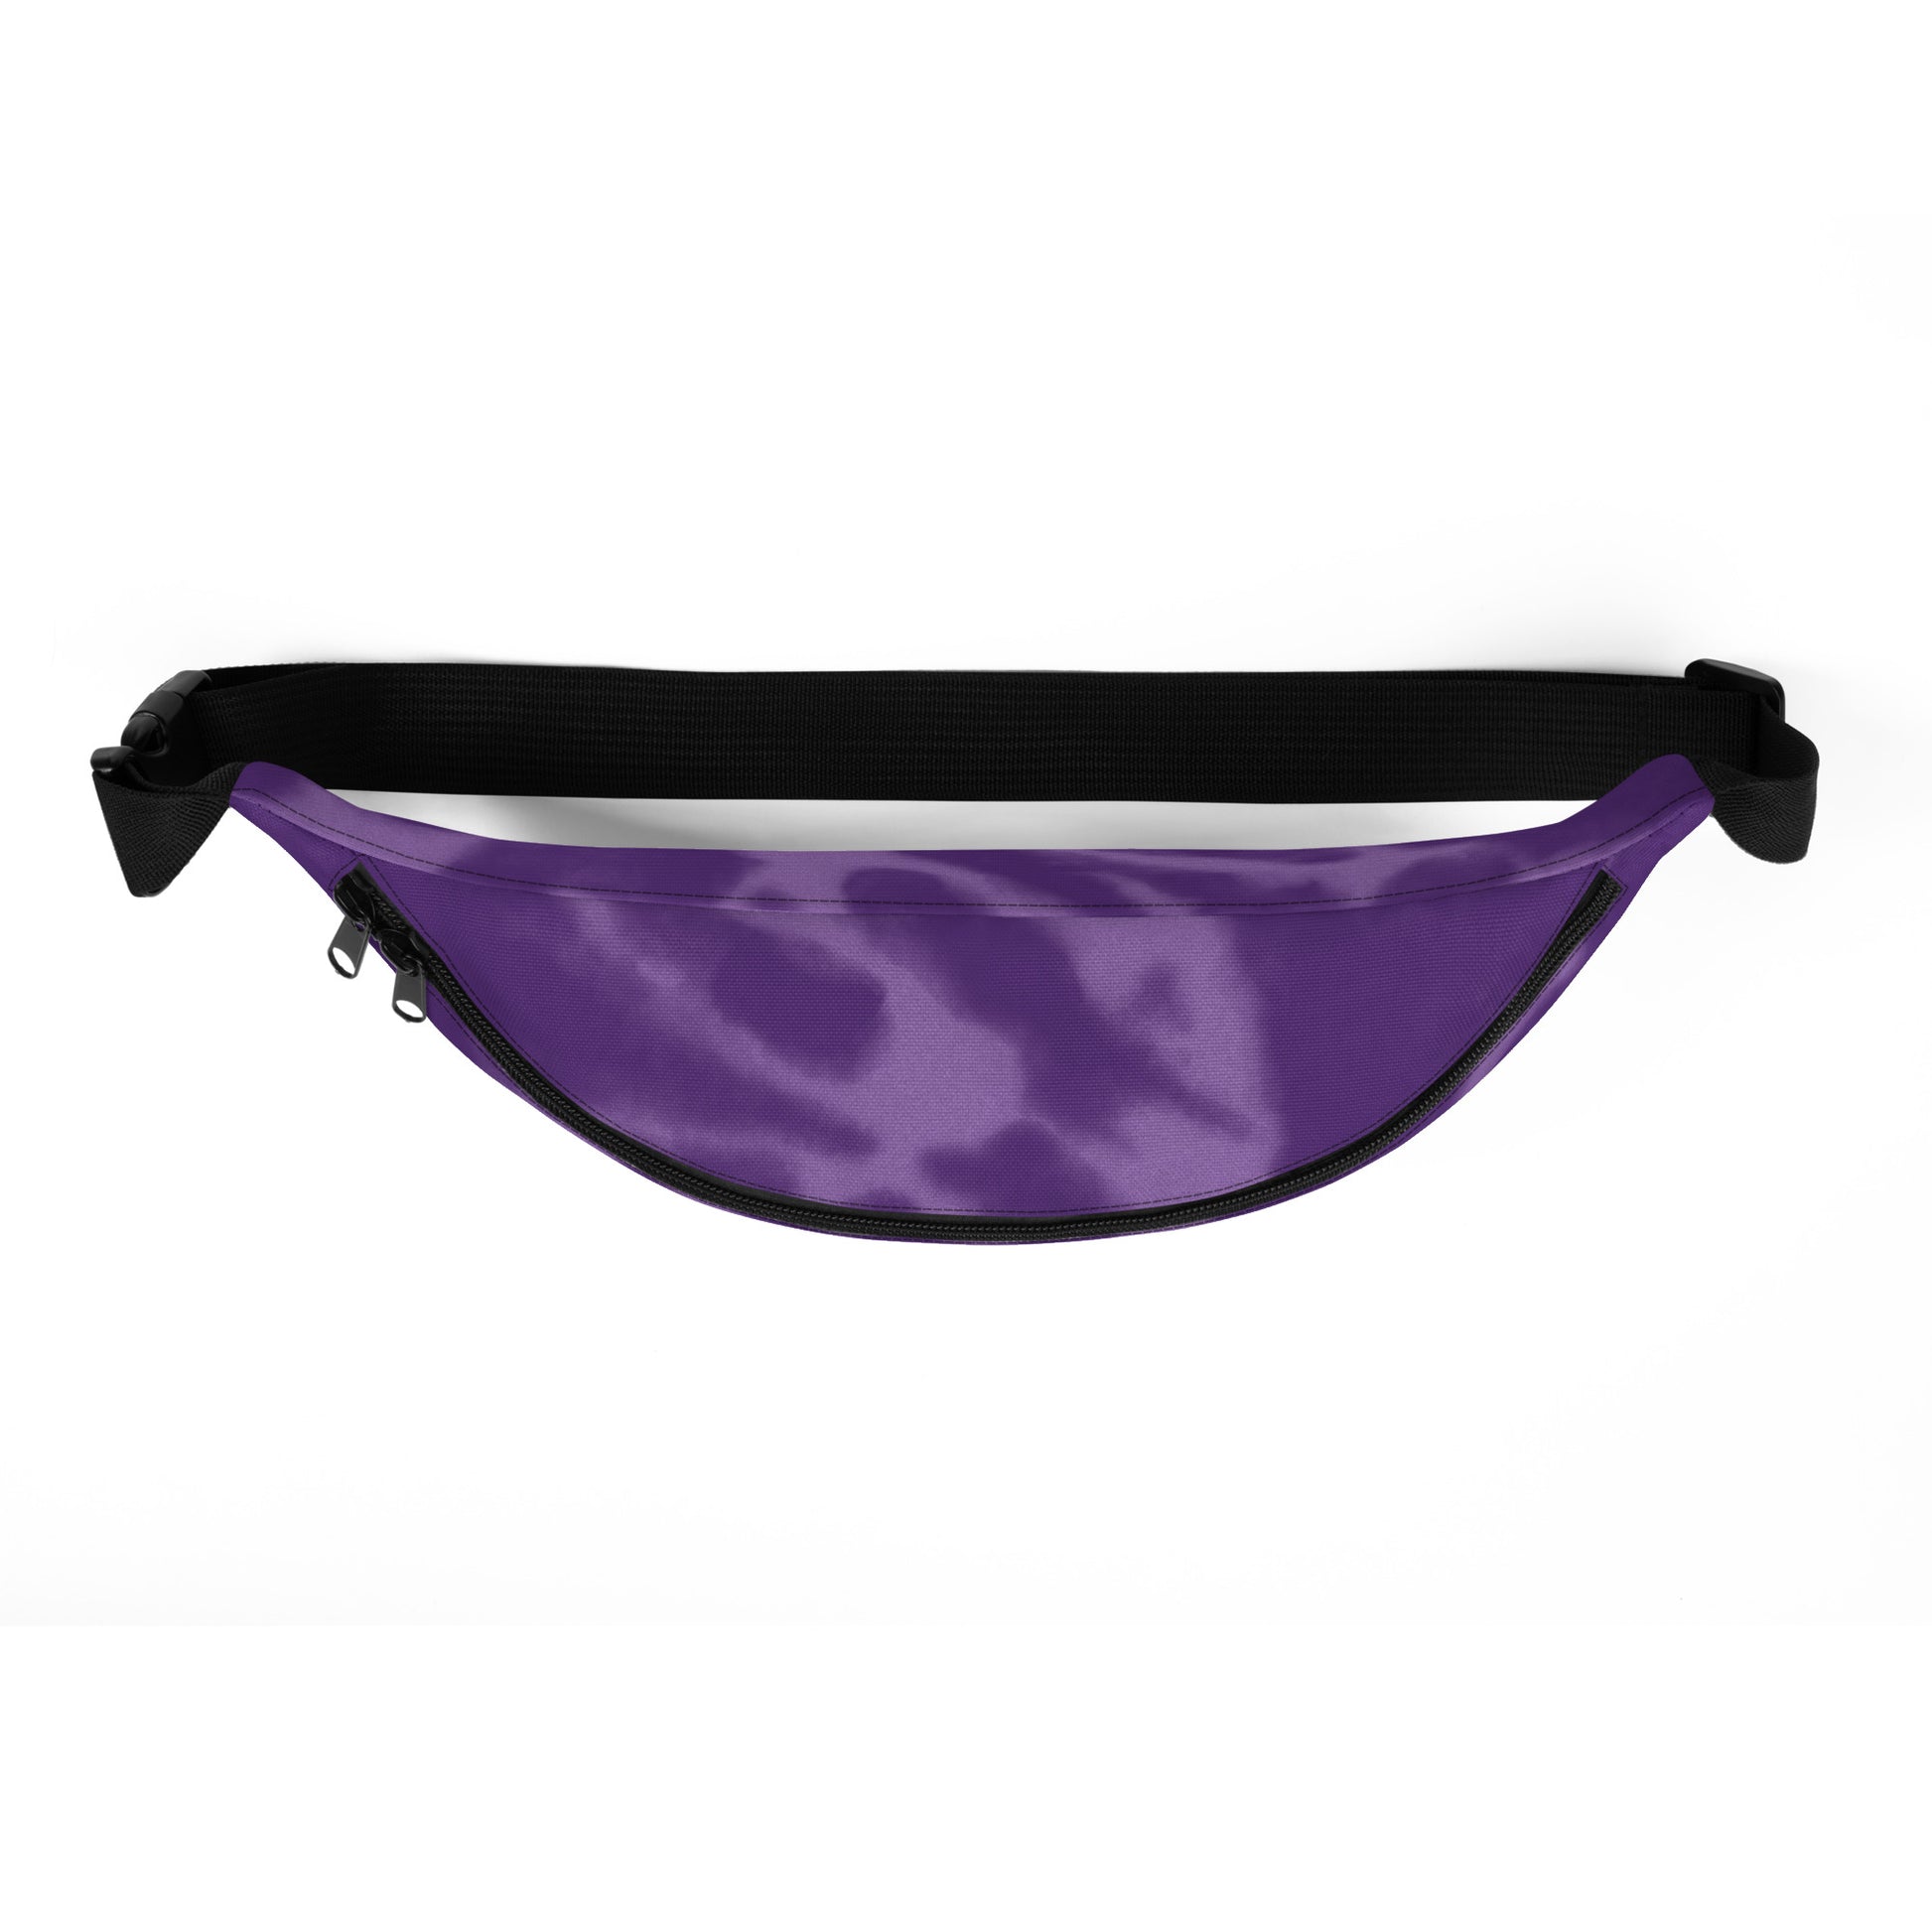 Travel Gift Fanny Pack - Purple Tie-Dye • EZE Buenos Aires • YHM Designs - Image 08